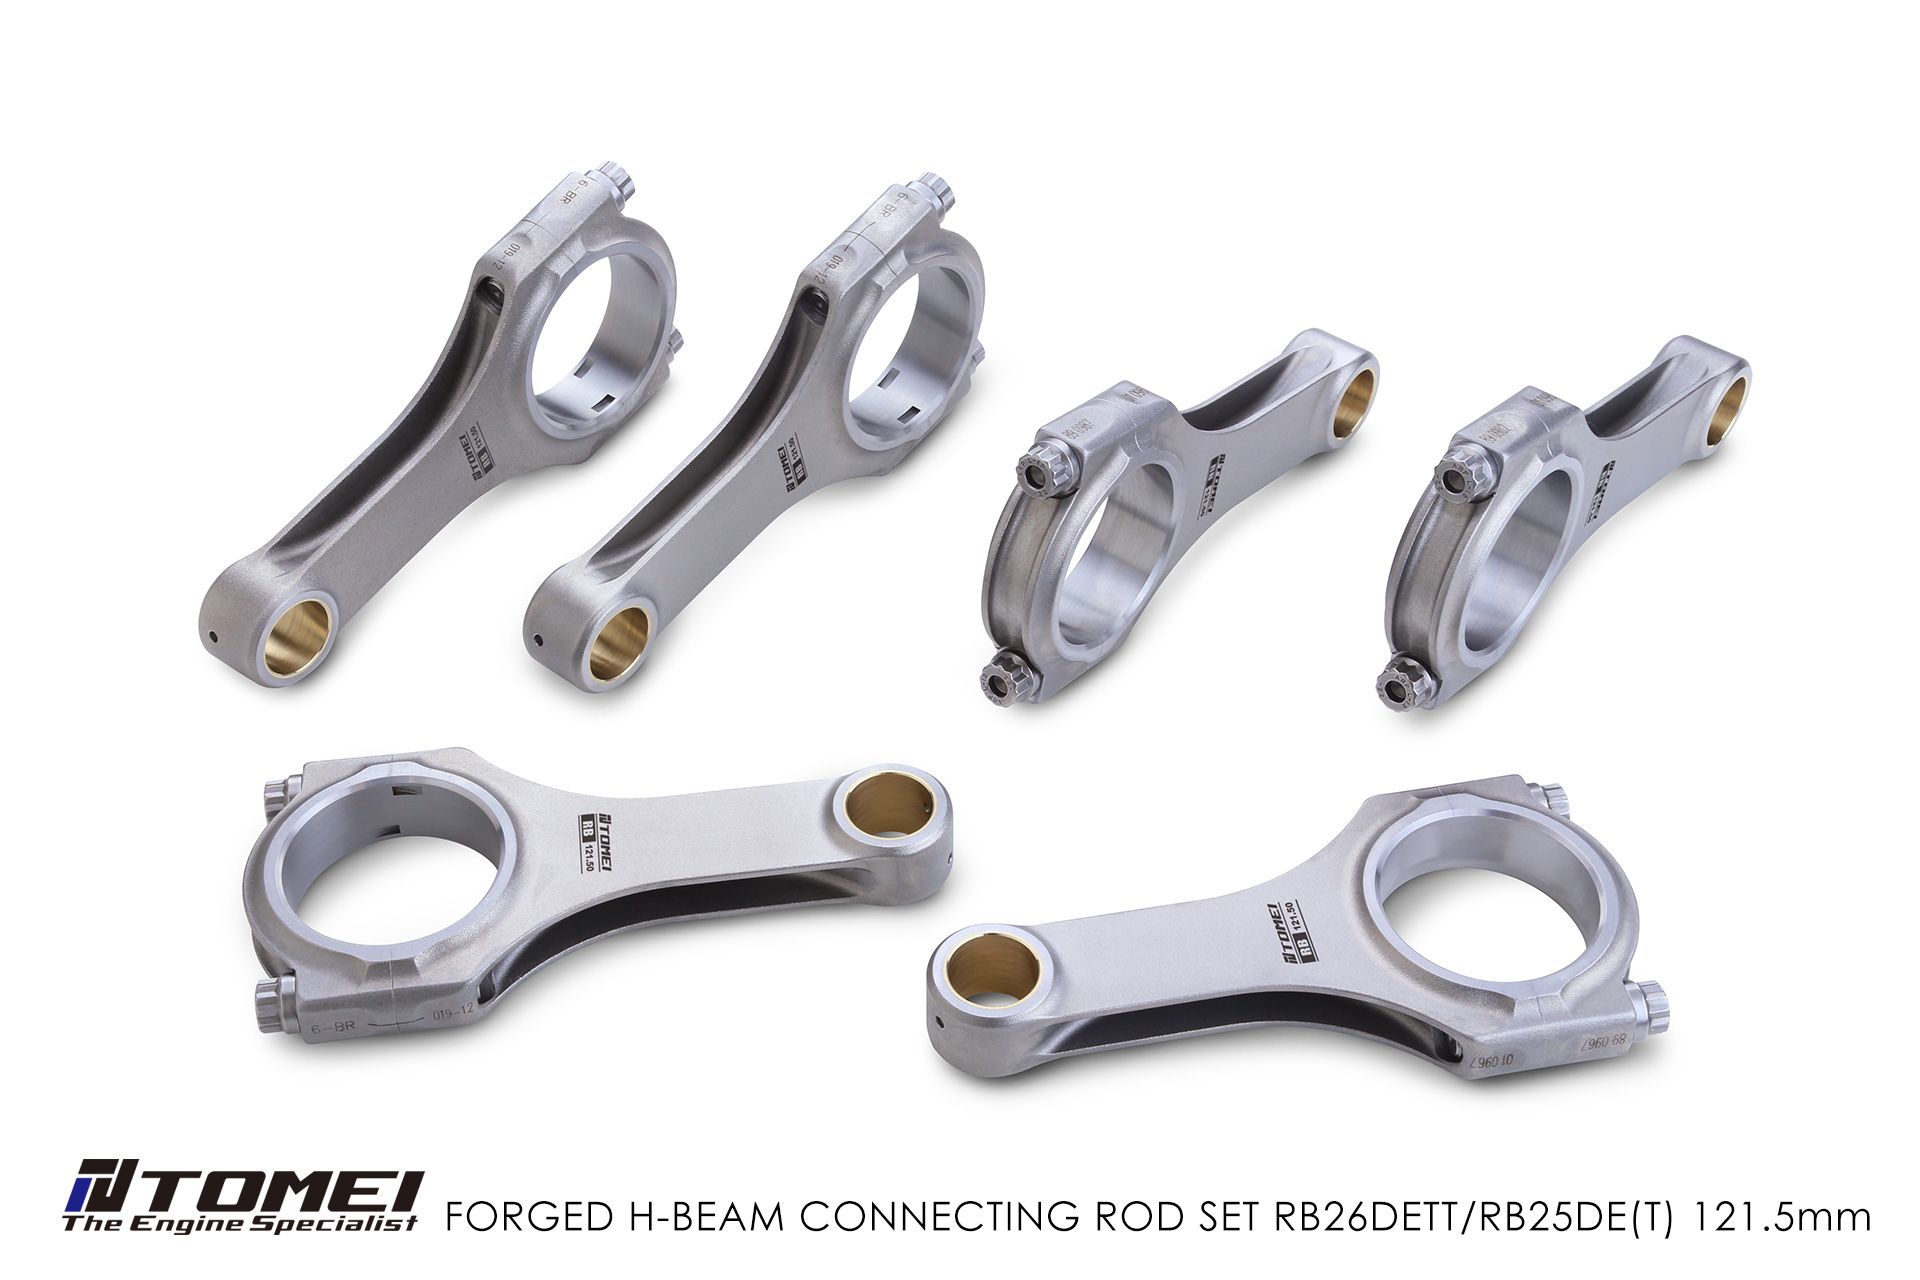 Tomei Forged H-Beam Connecting Rods 121.5mm RB25DET RB26DETT - Nissan Skyline R32 R33 R34